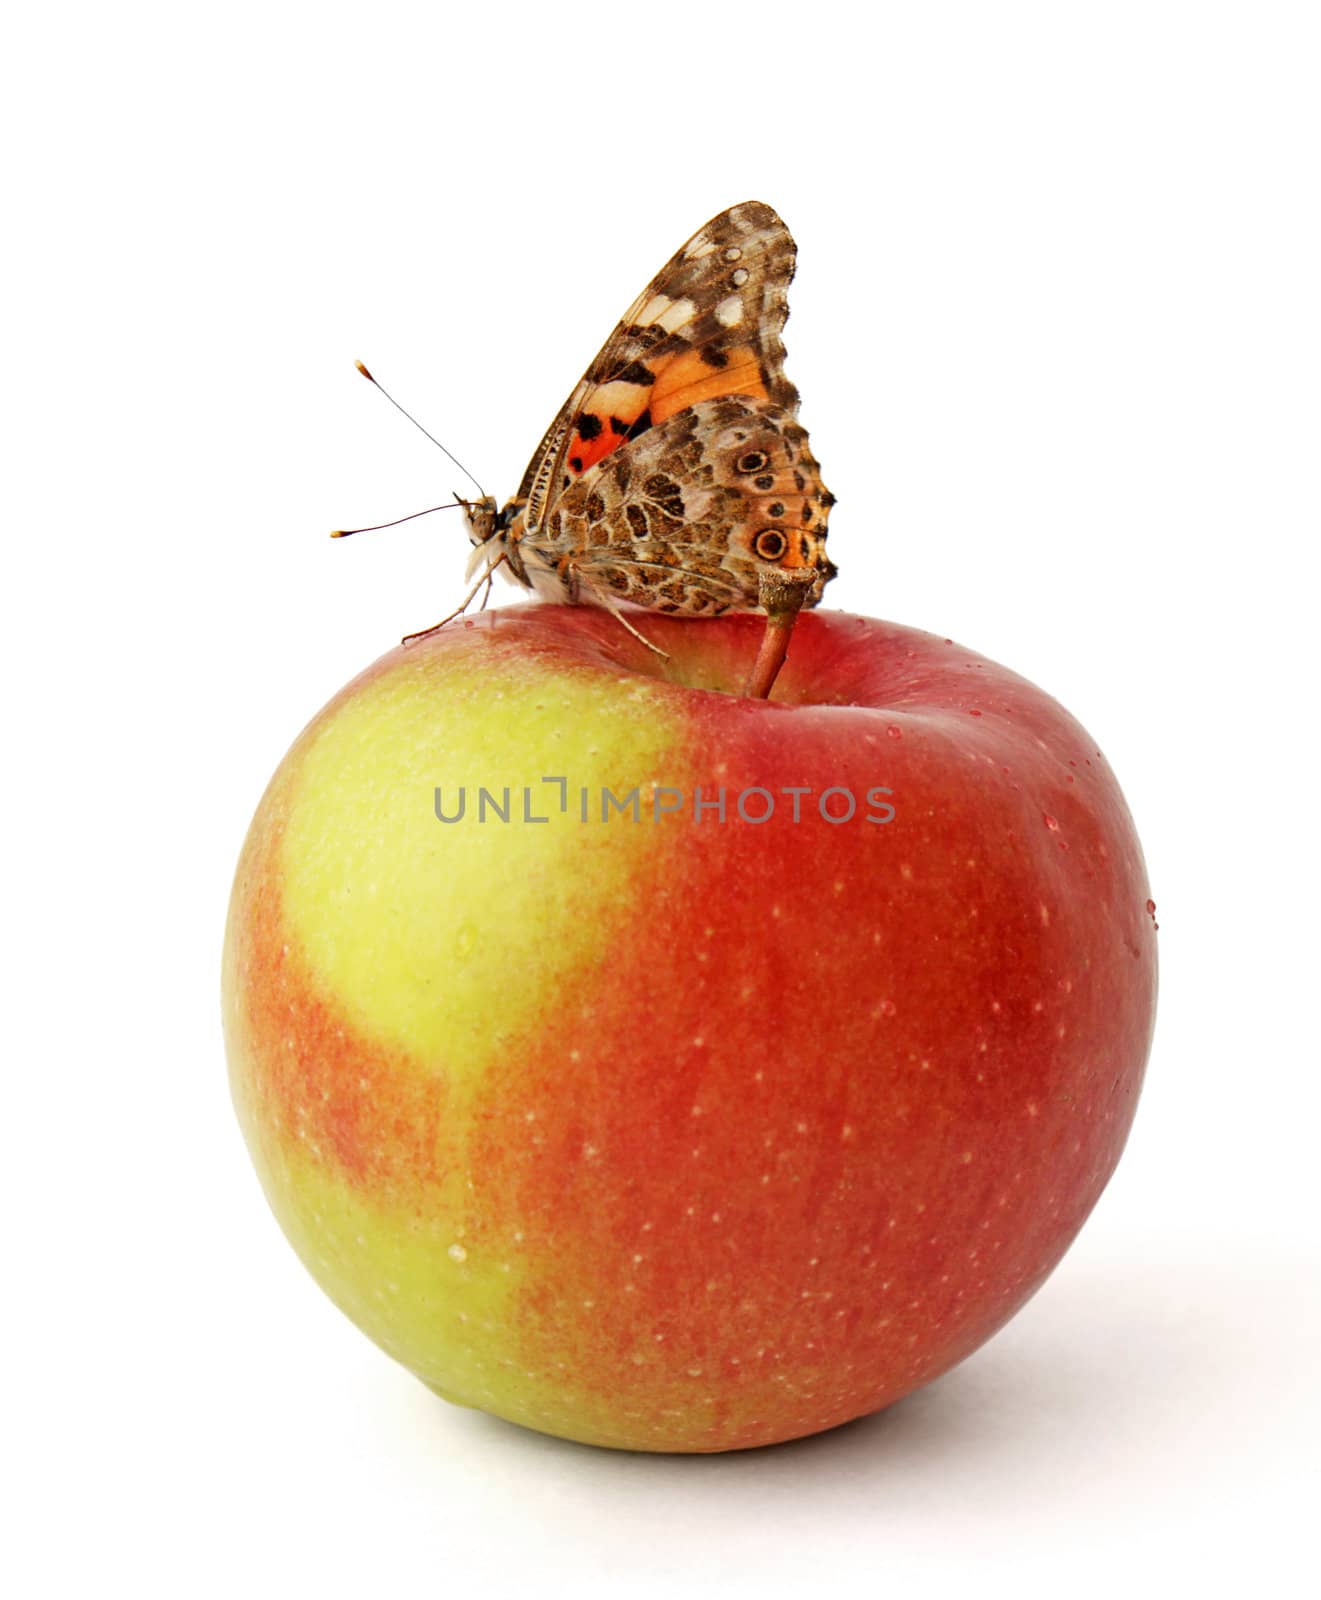 butterfly (Painted Lady) on apple over white